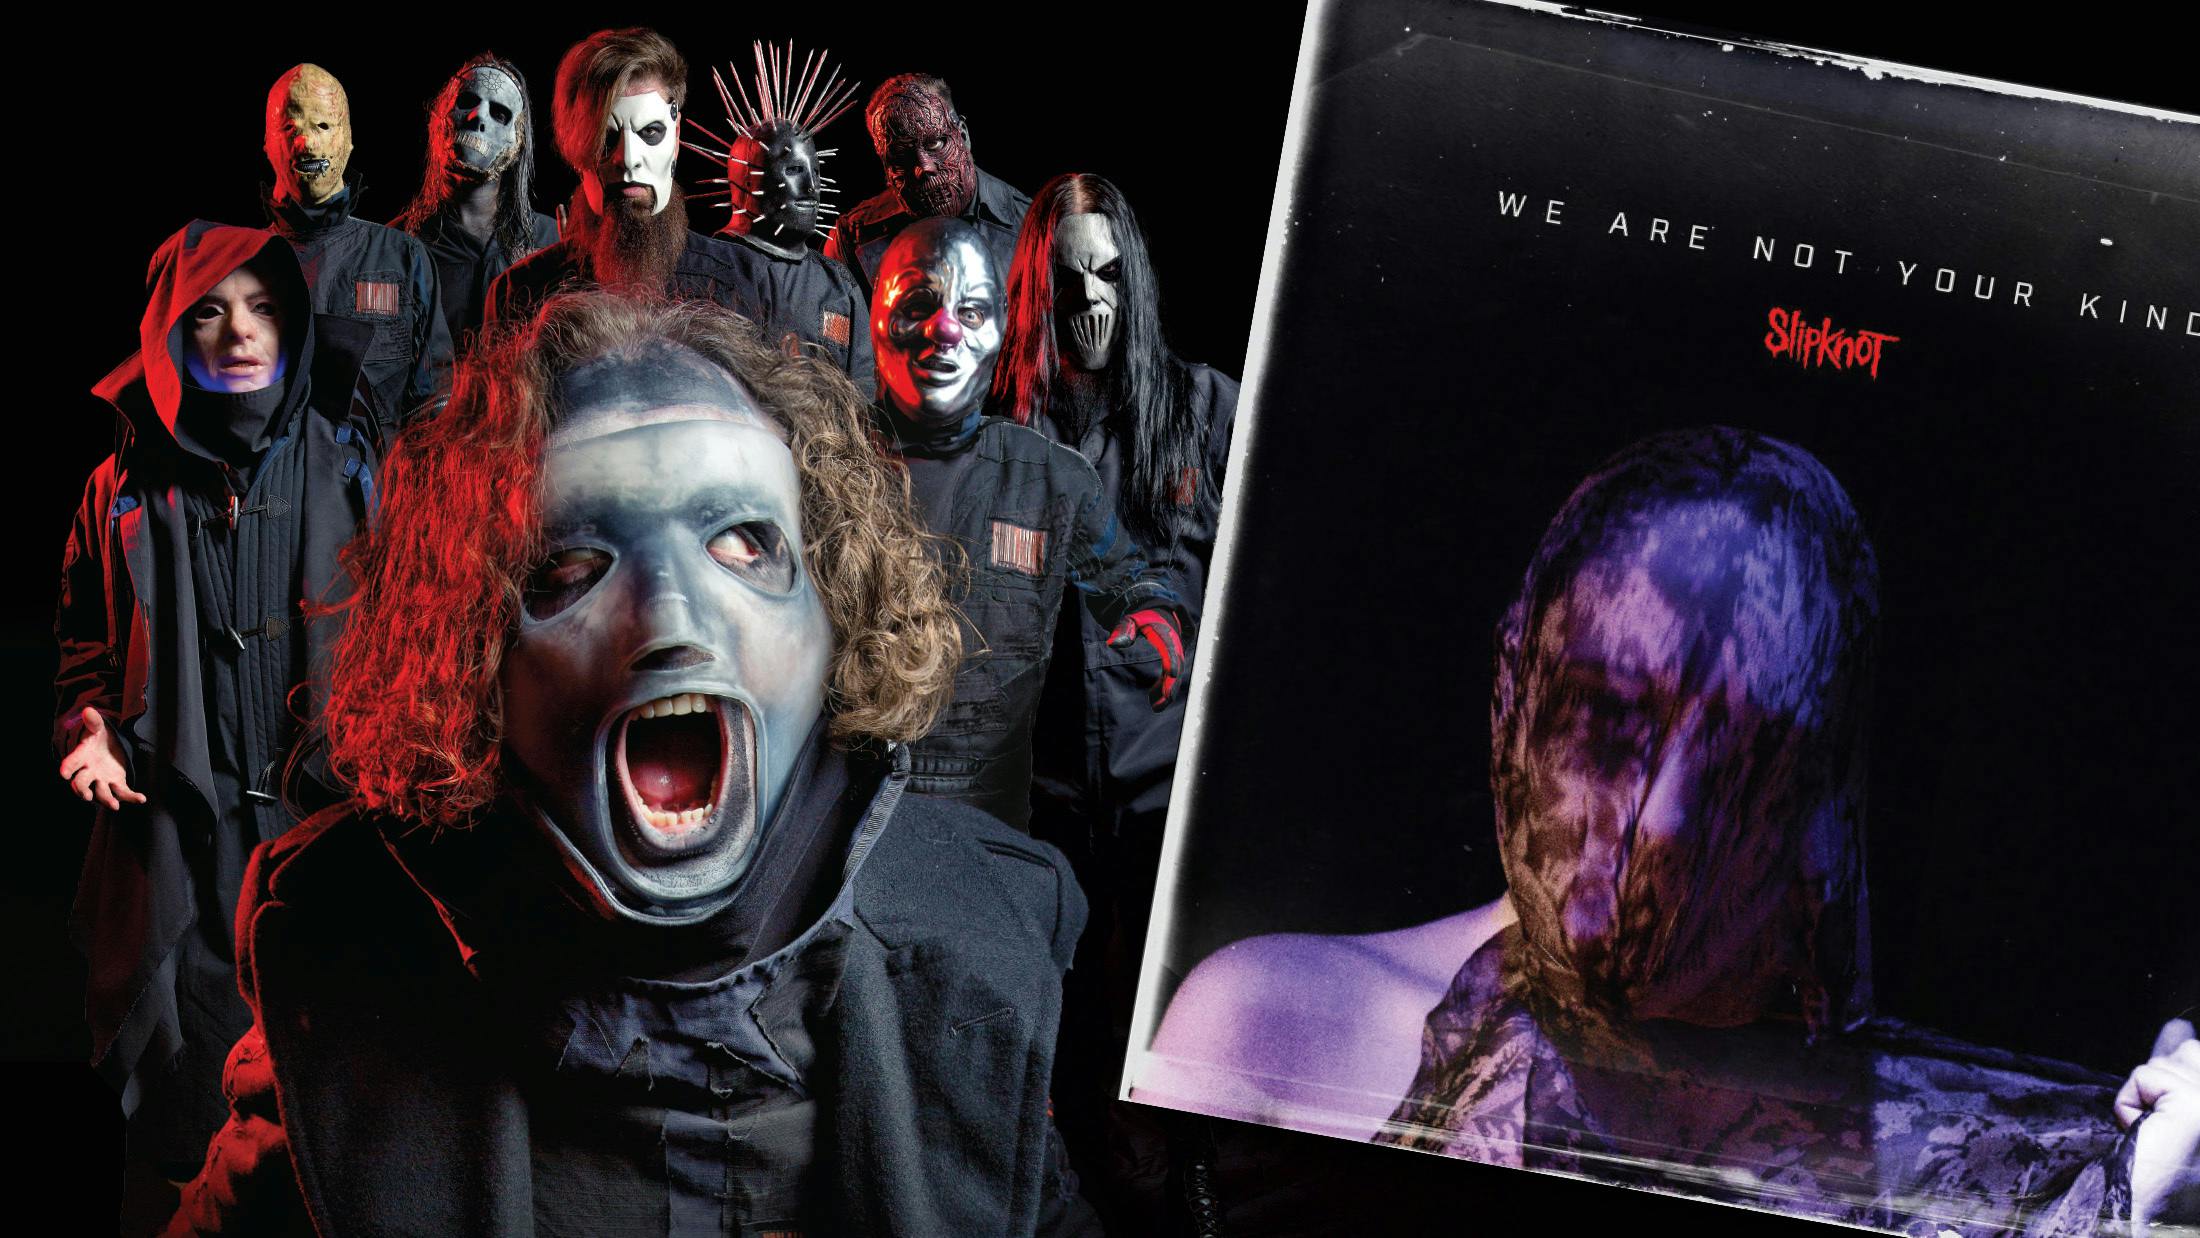 Why Slipknot's We Are Not Your Kind Is The Best Album Of 2019